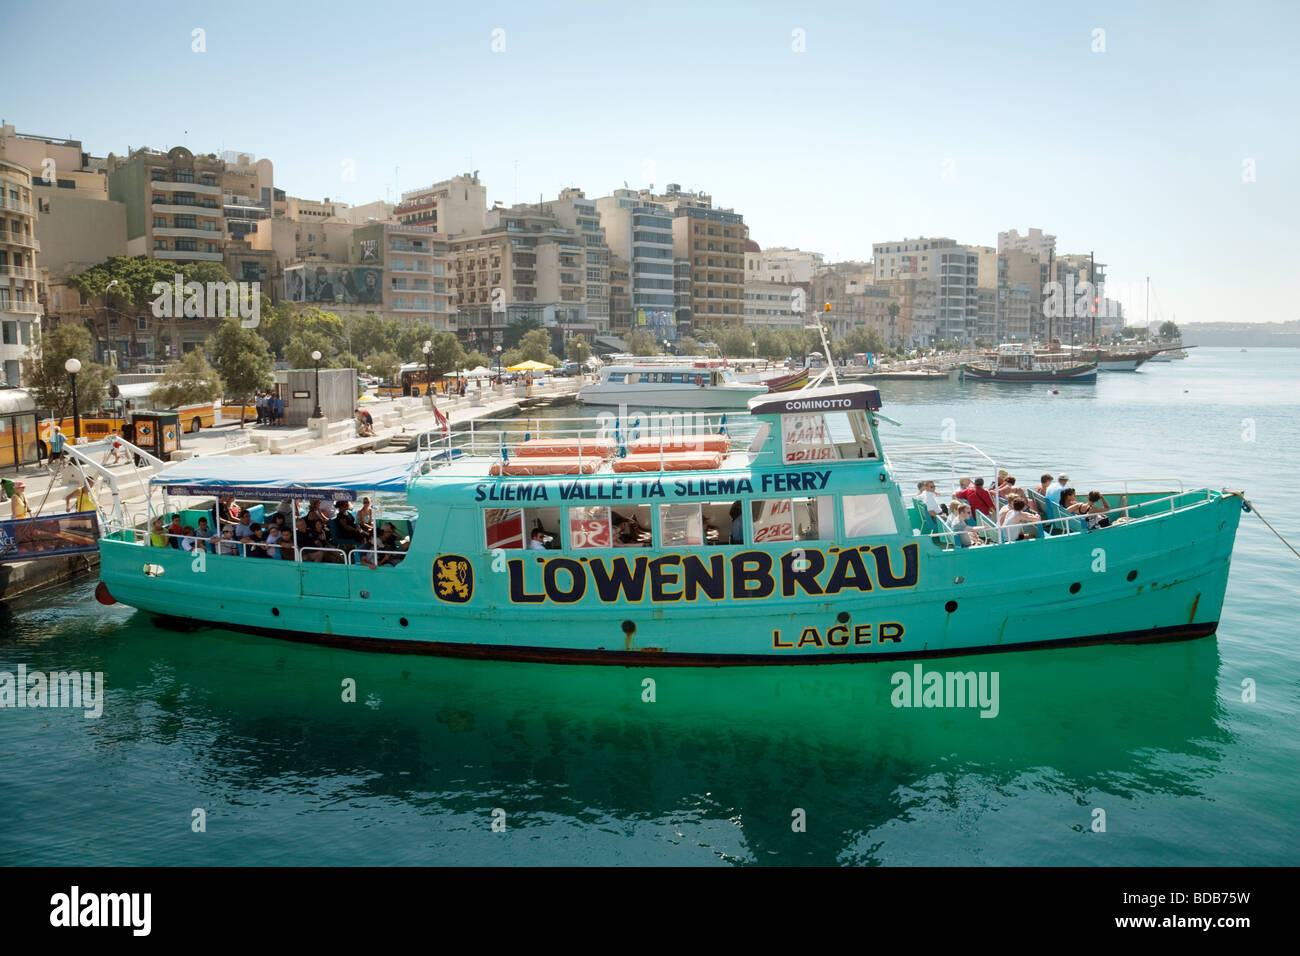 The Sliema to Valletta ferry, Malta with prominent Lowenbrau advertising Stock Photo